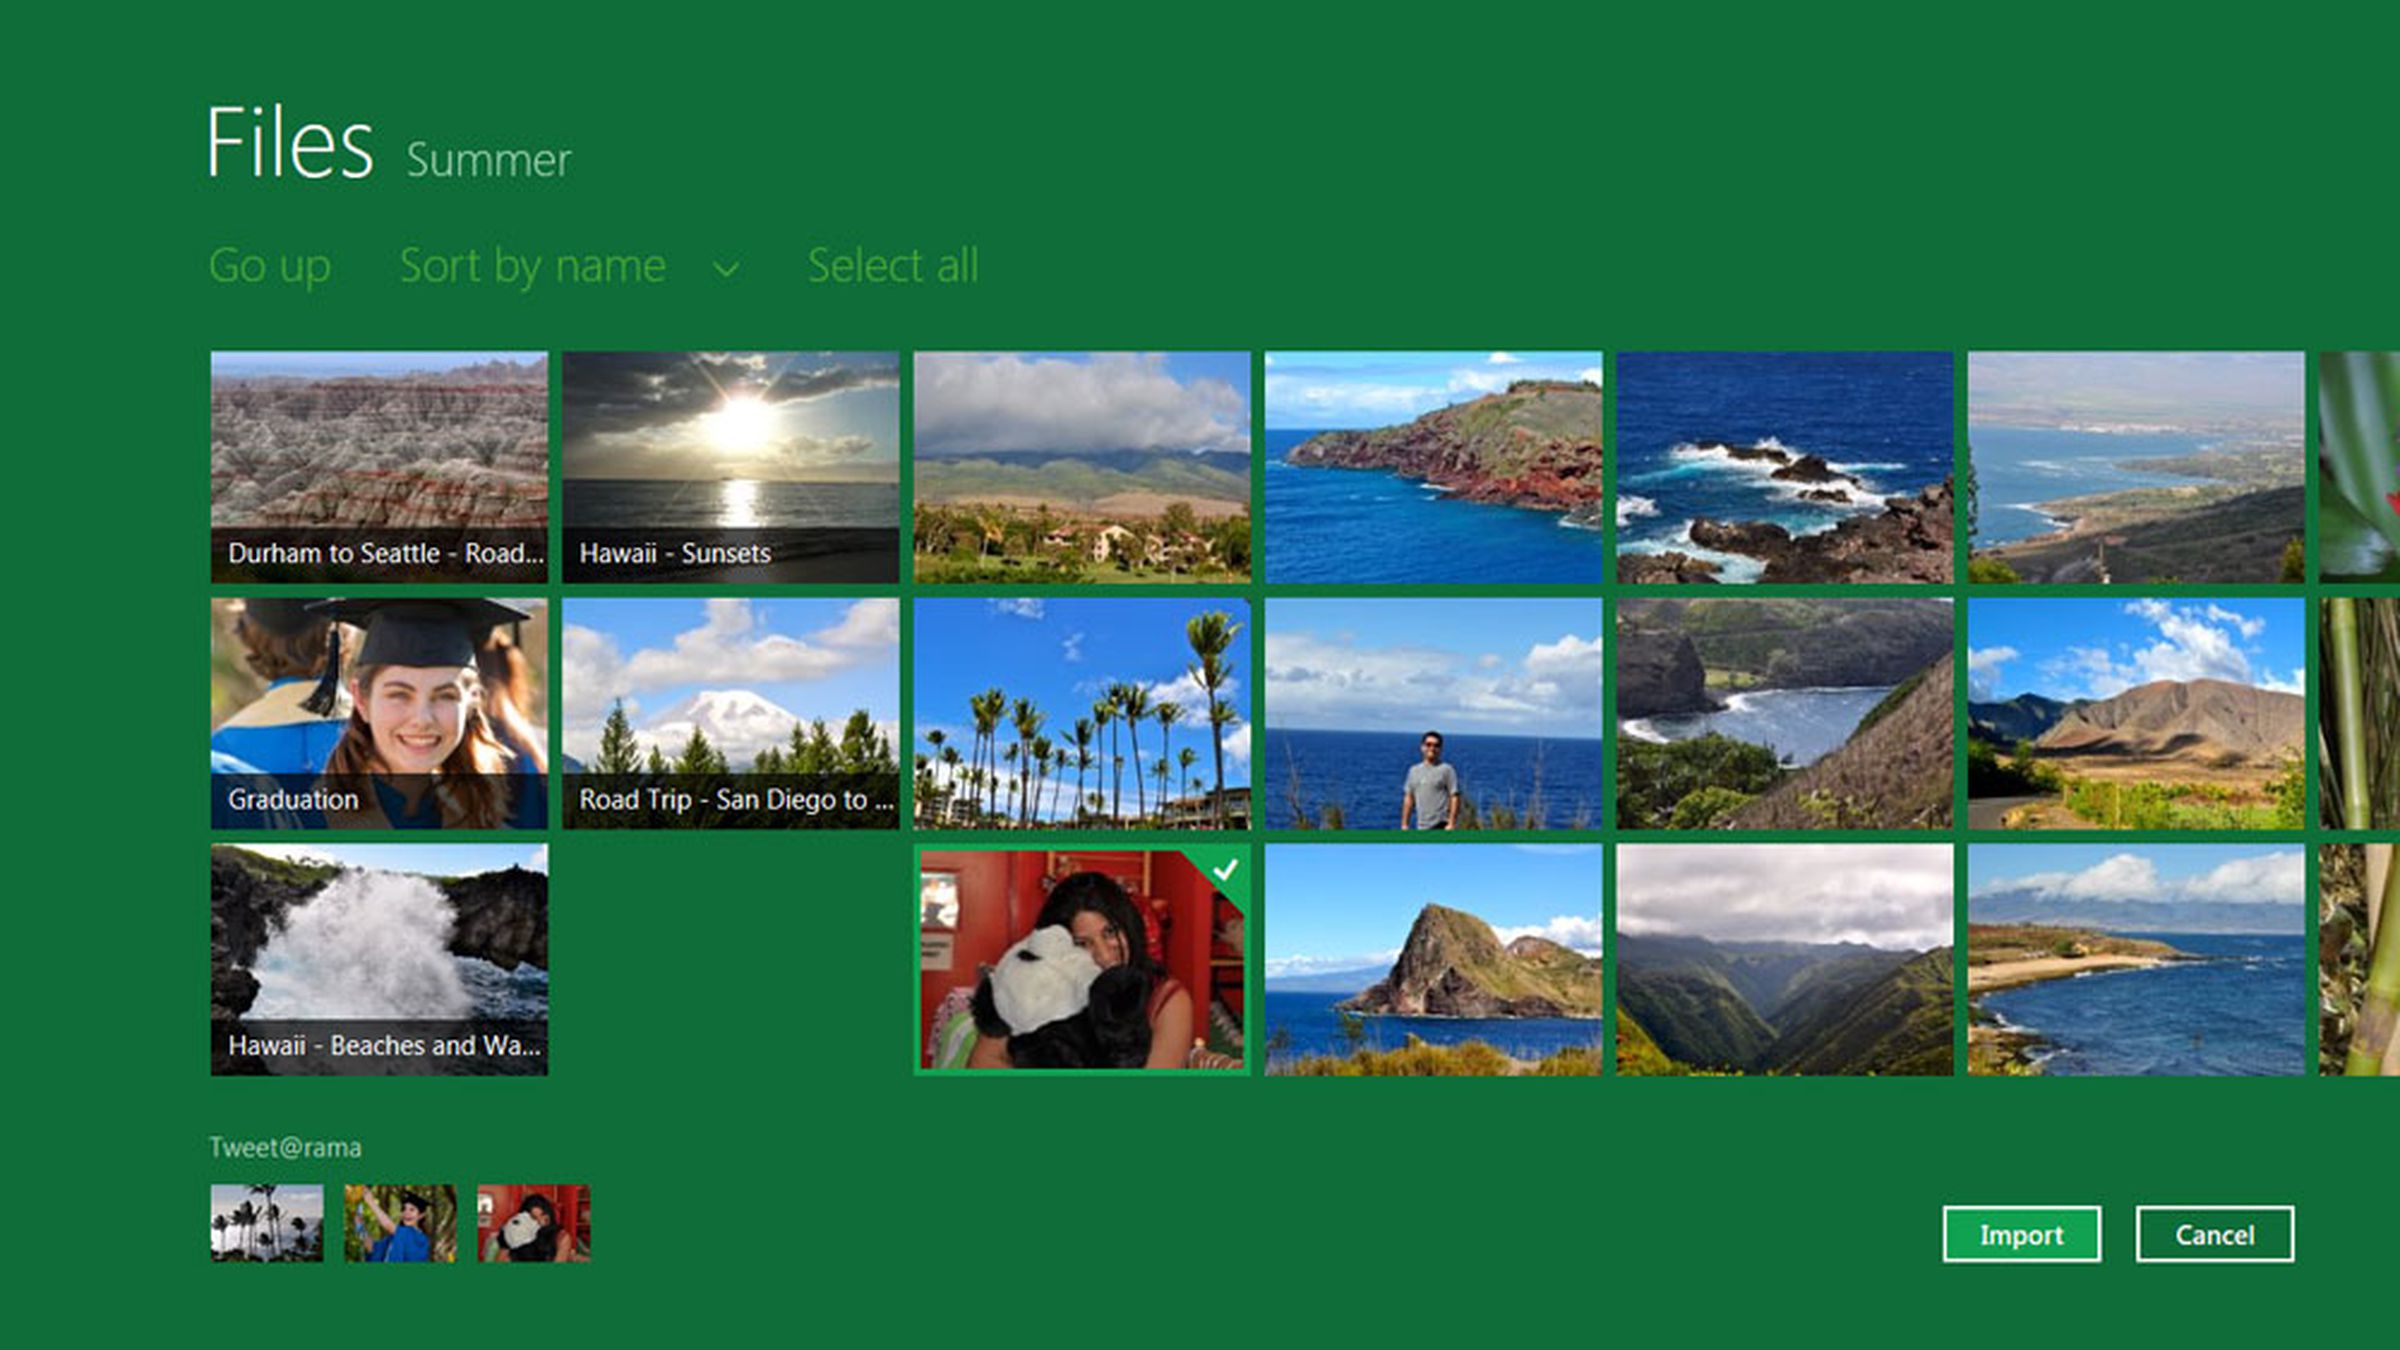 Microsoft releases Windows 8 Developer Preview, announces Windows Store (update: it’s out early!)